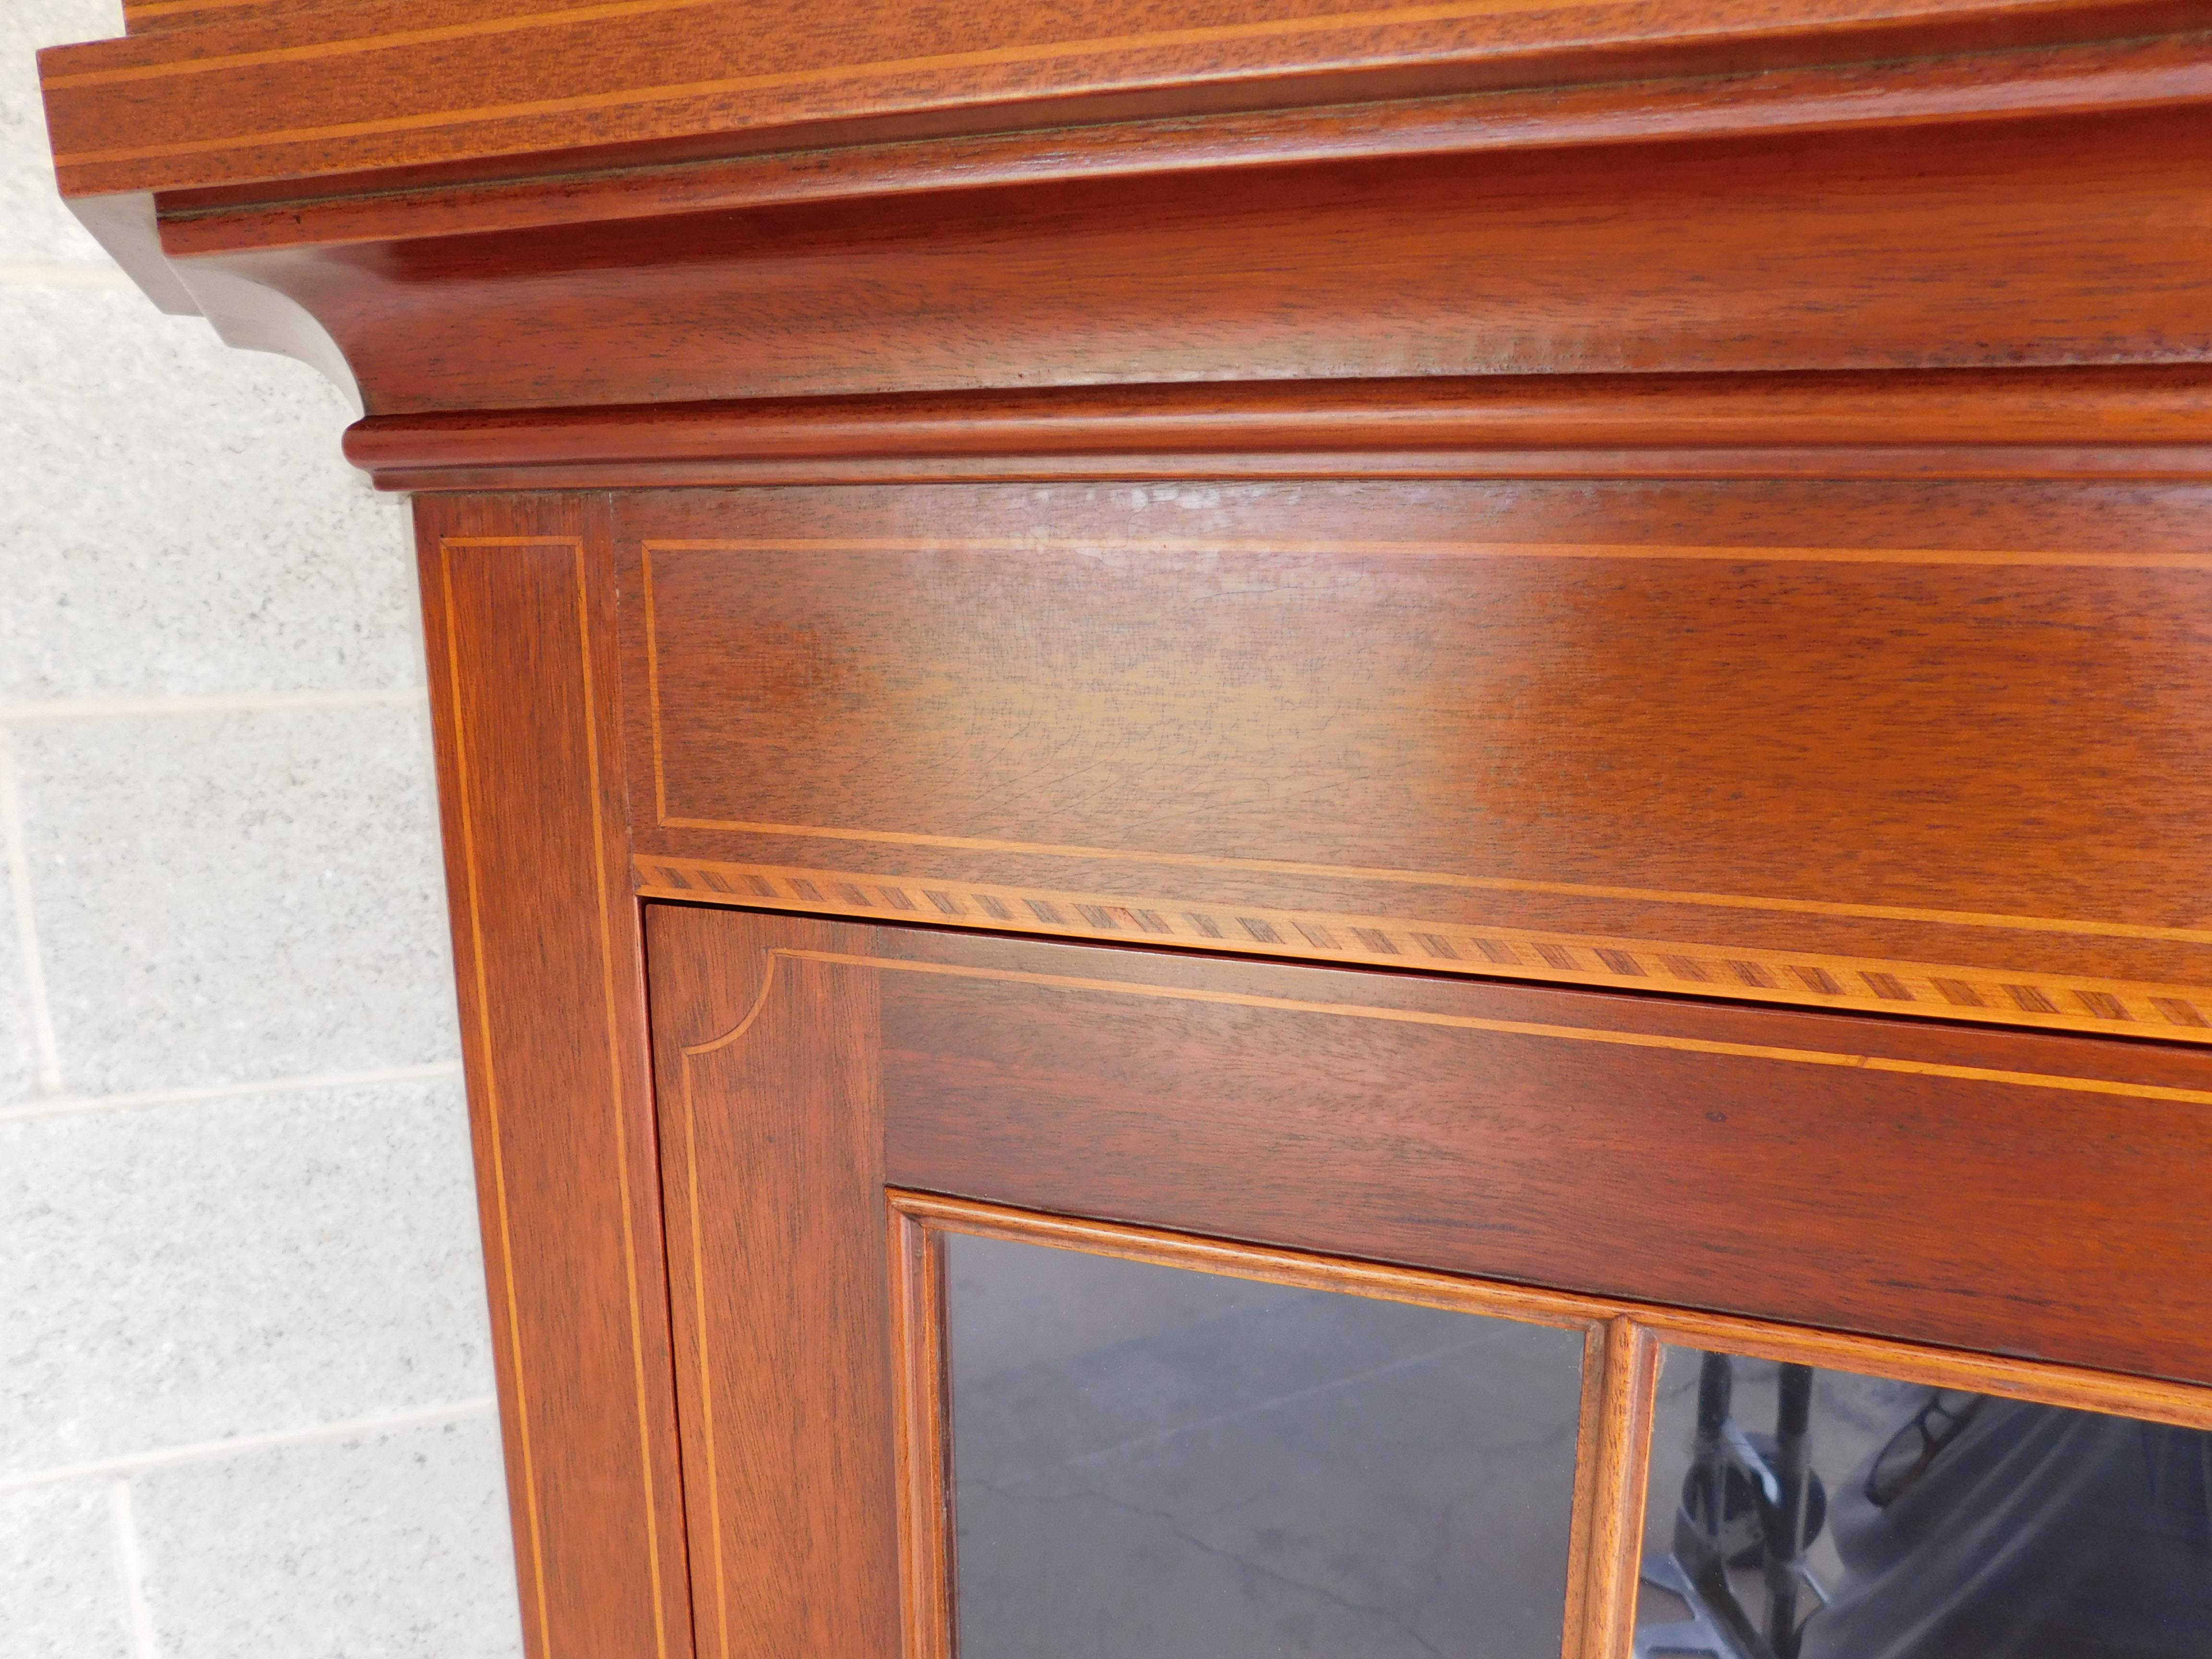 Biggs Furniture Federal Style Mahogany Banded Petite Corner Cabinet In Good Condition For Sale In Parkesburg, PA